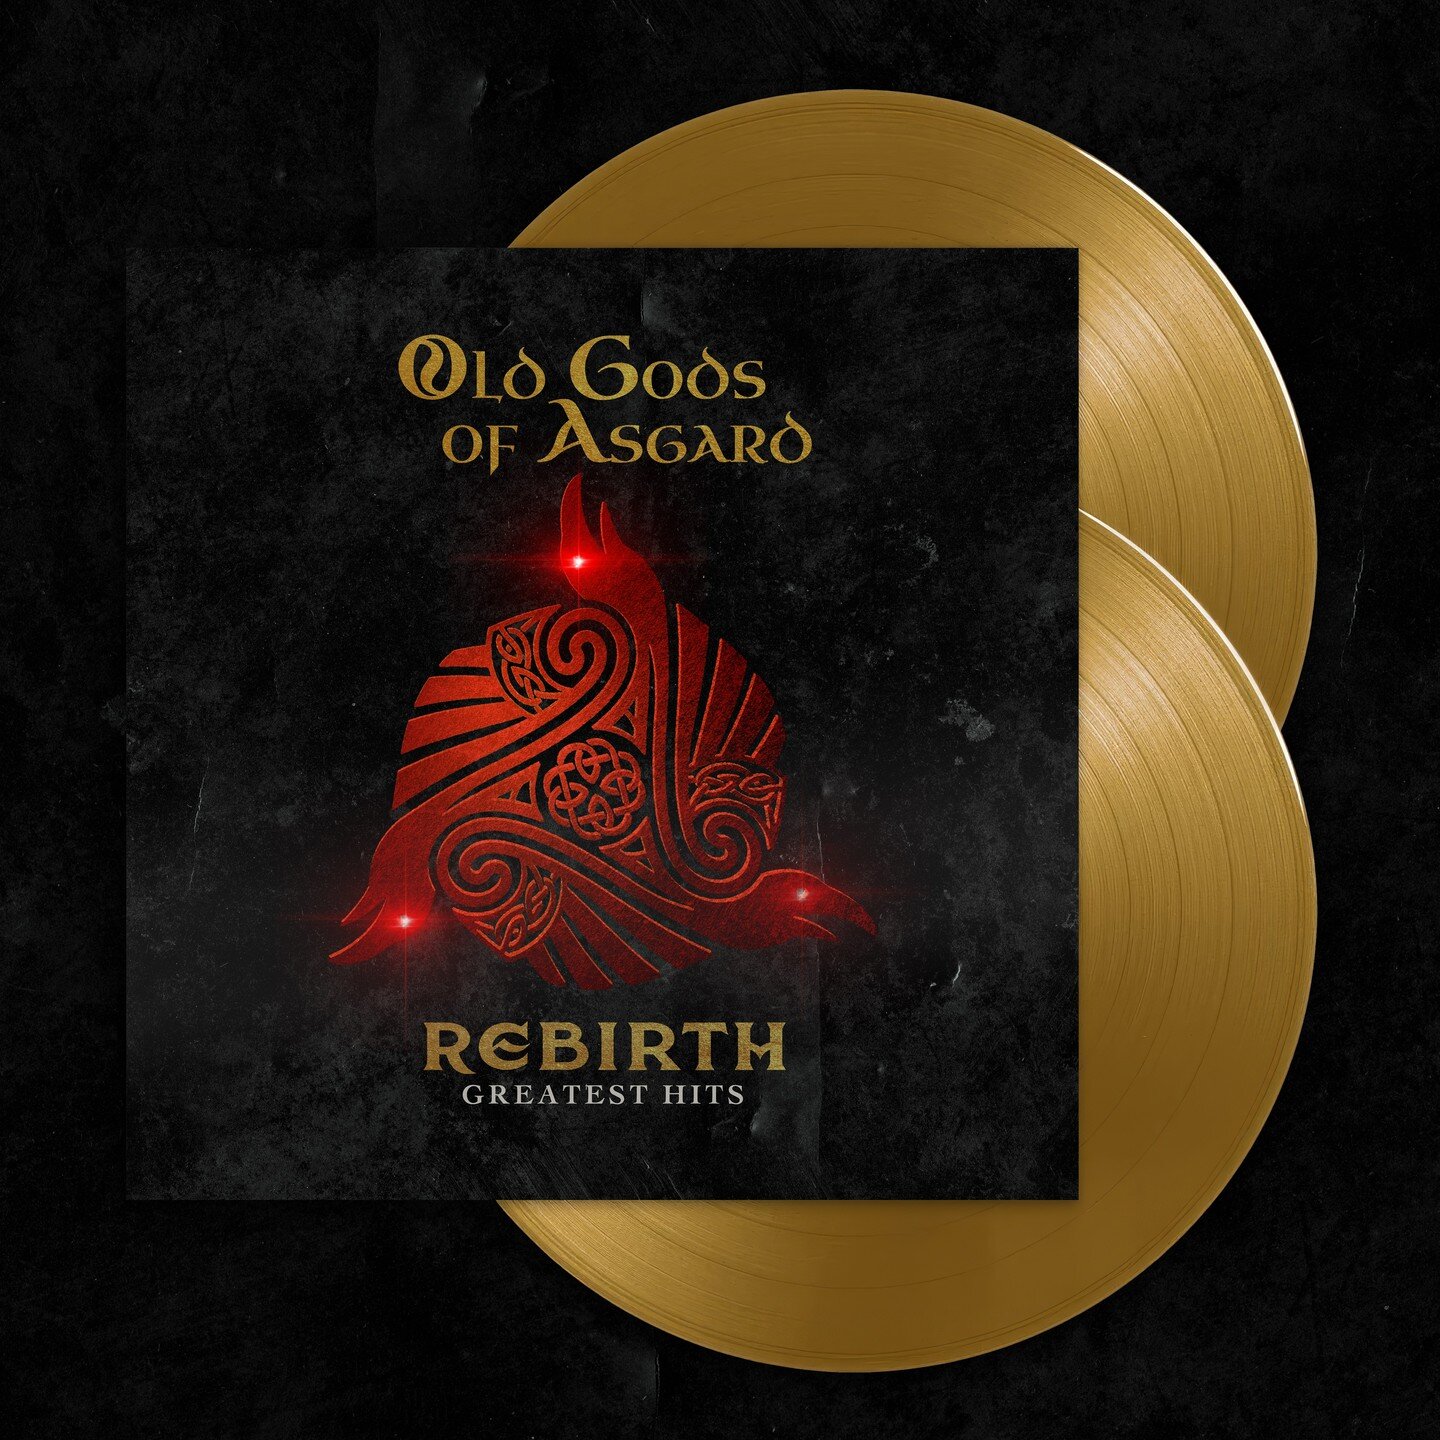 Old Gods of Asgard&rsquo;s Rebirth - Greatest Hits is the best-selling vinyl album of 2023 in Finland! 🤘🔥 The International Federation of the Phonographic Industry (IFPI) just released last year&rsquo;s top charts, and we are thrilled and happy to 